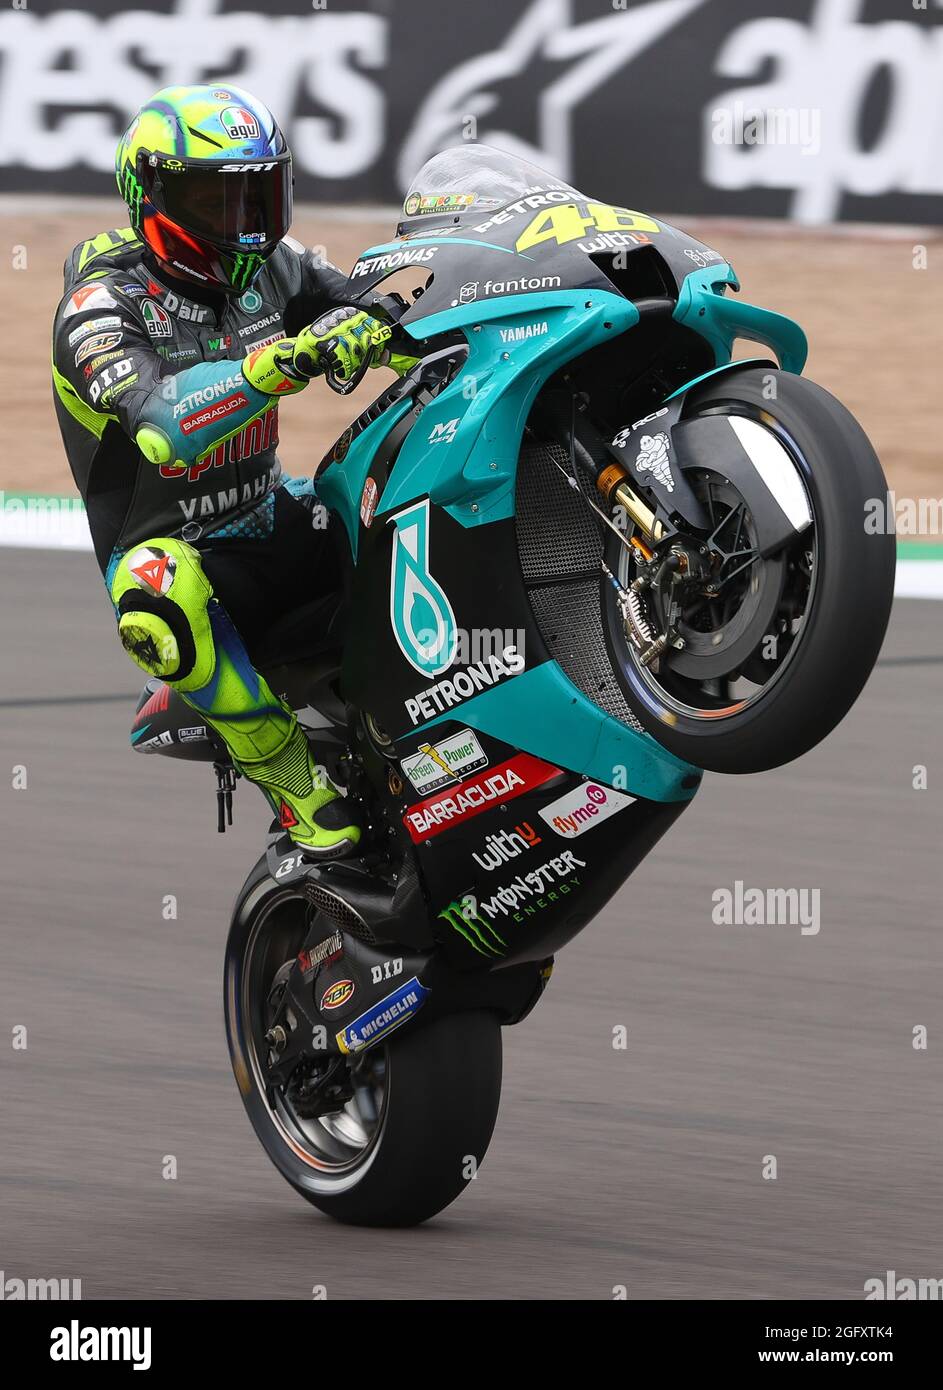 Towcester, England, 27th Aug 2021, Valentino Rossi Petronas Yamaha SRT celebration wheelie during the Monster Energy British Grand Prix MotoGP at Silverstone Circuit, Towcester, England on the 27 to 29 August 2021.